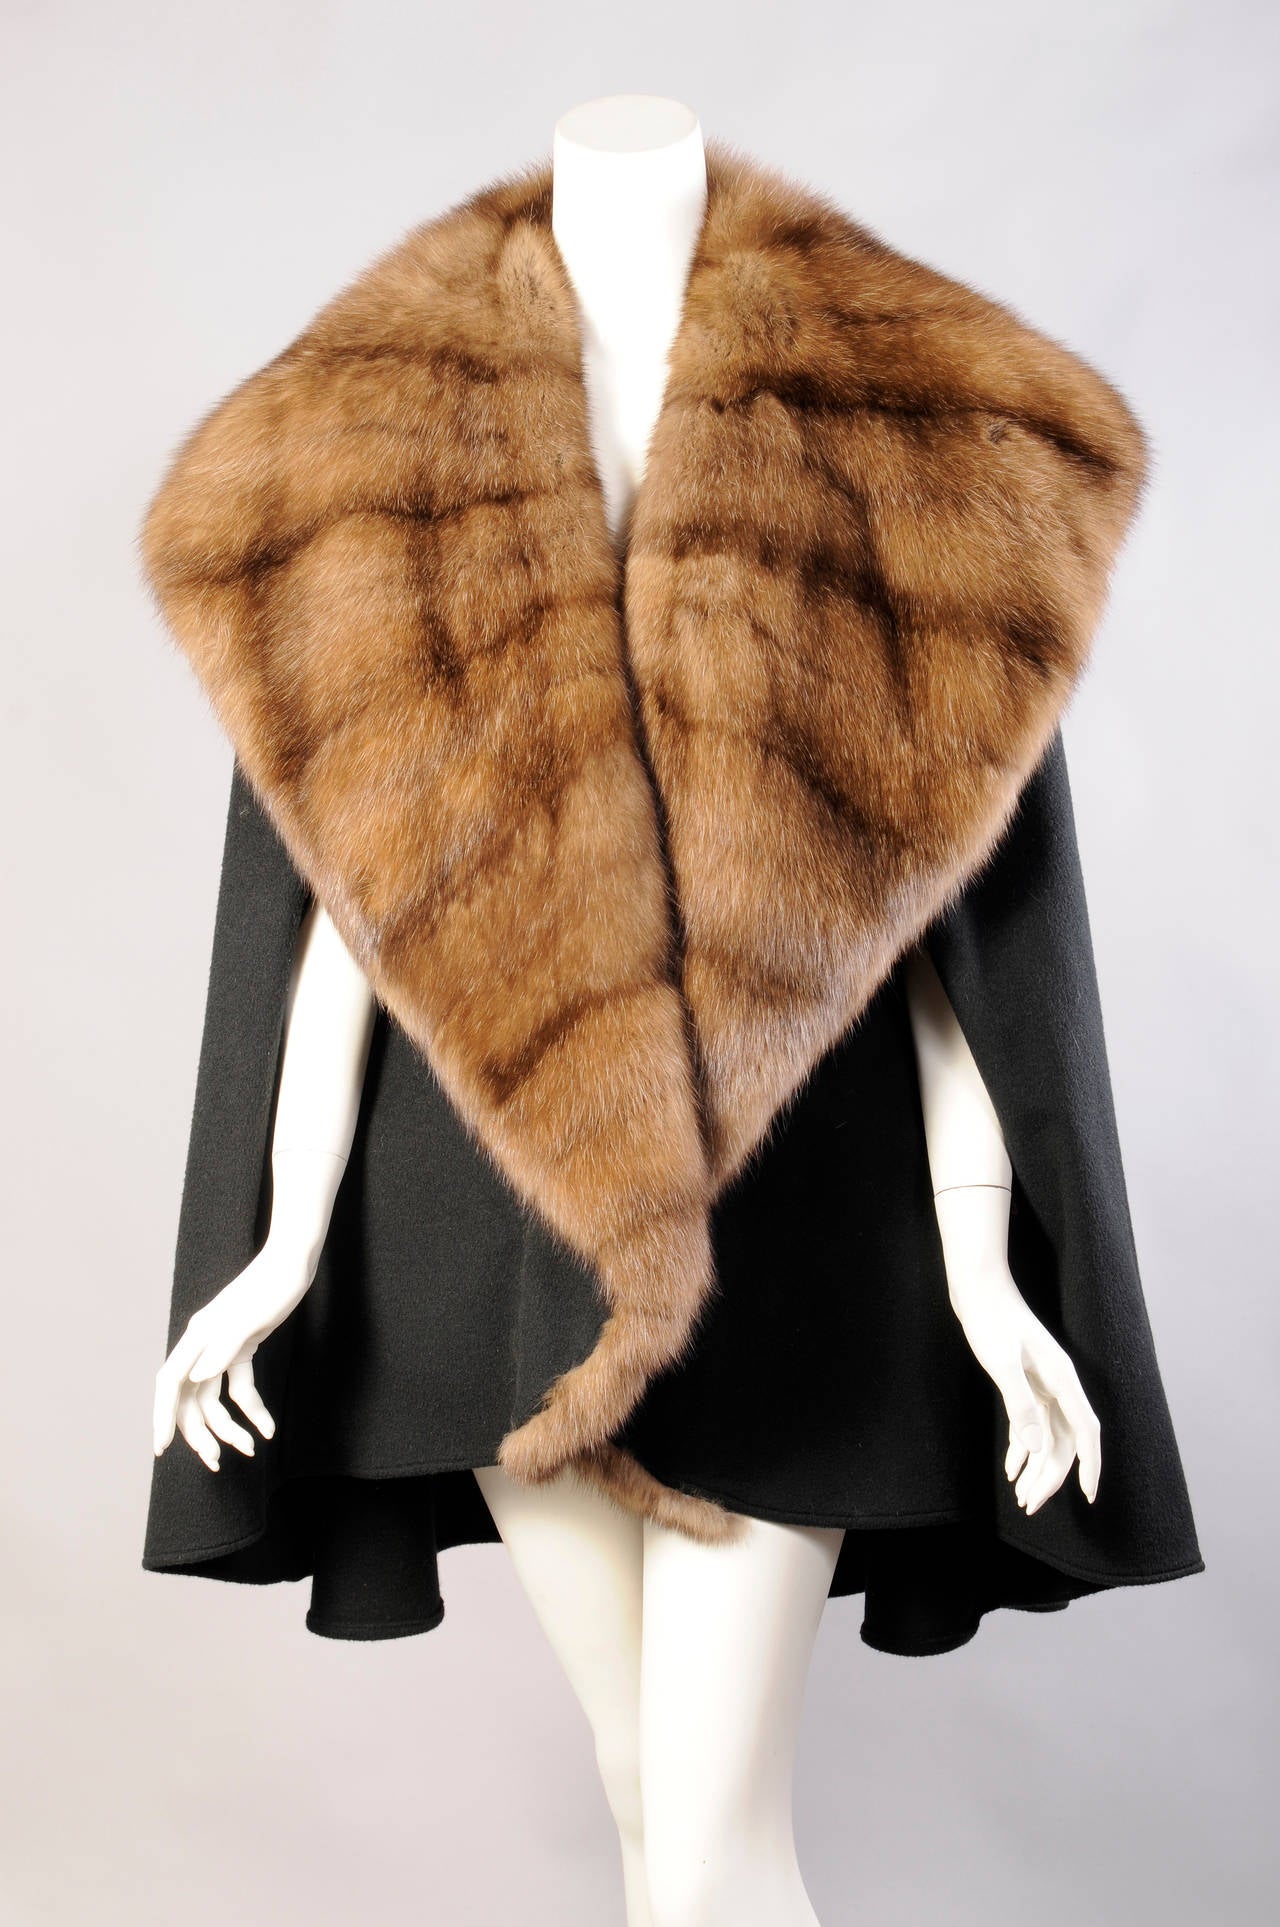 A generous Russian sable collar reaches all the way to the hemline on this double faced black cashmere wrap retailed by Bergdorf Goodman. There are two openings for your hands to wear it as a cape, or you can toss it over your shoulder as a wrap. It